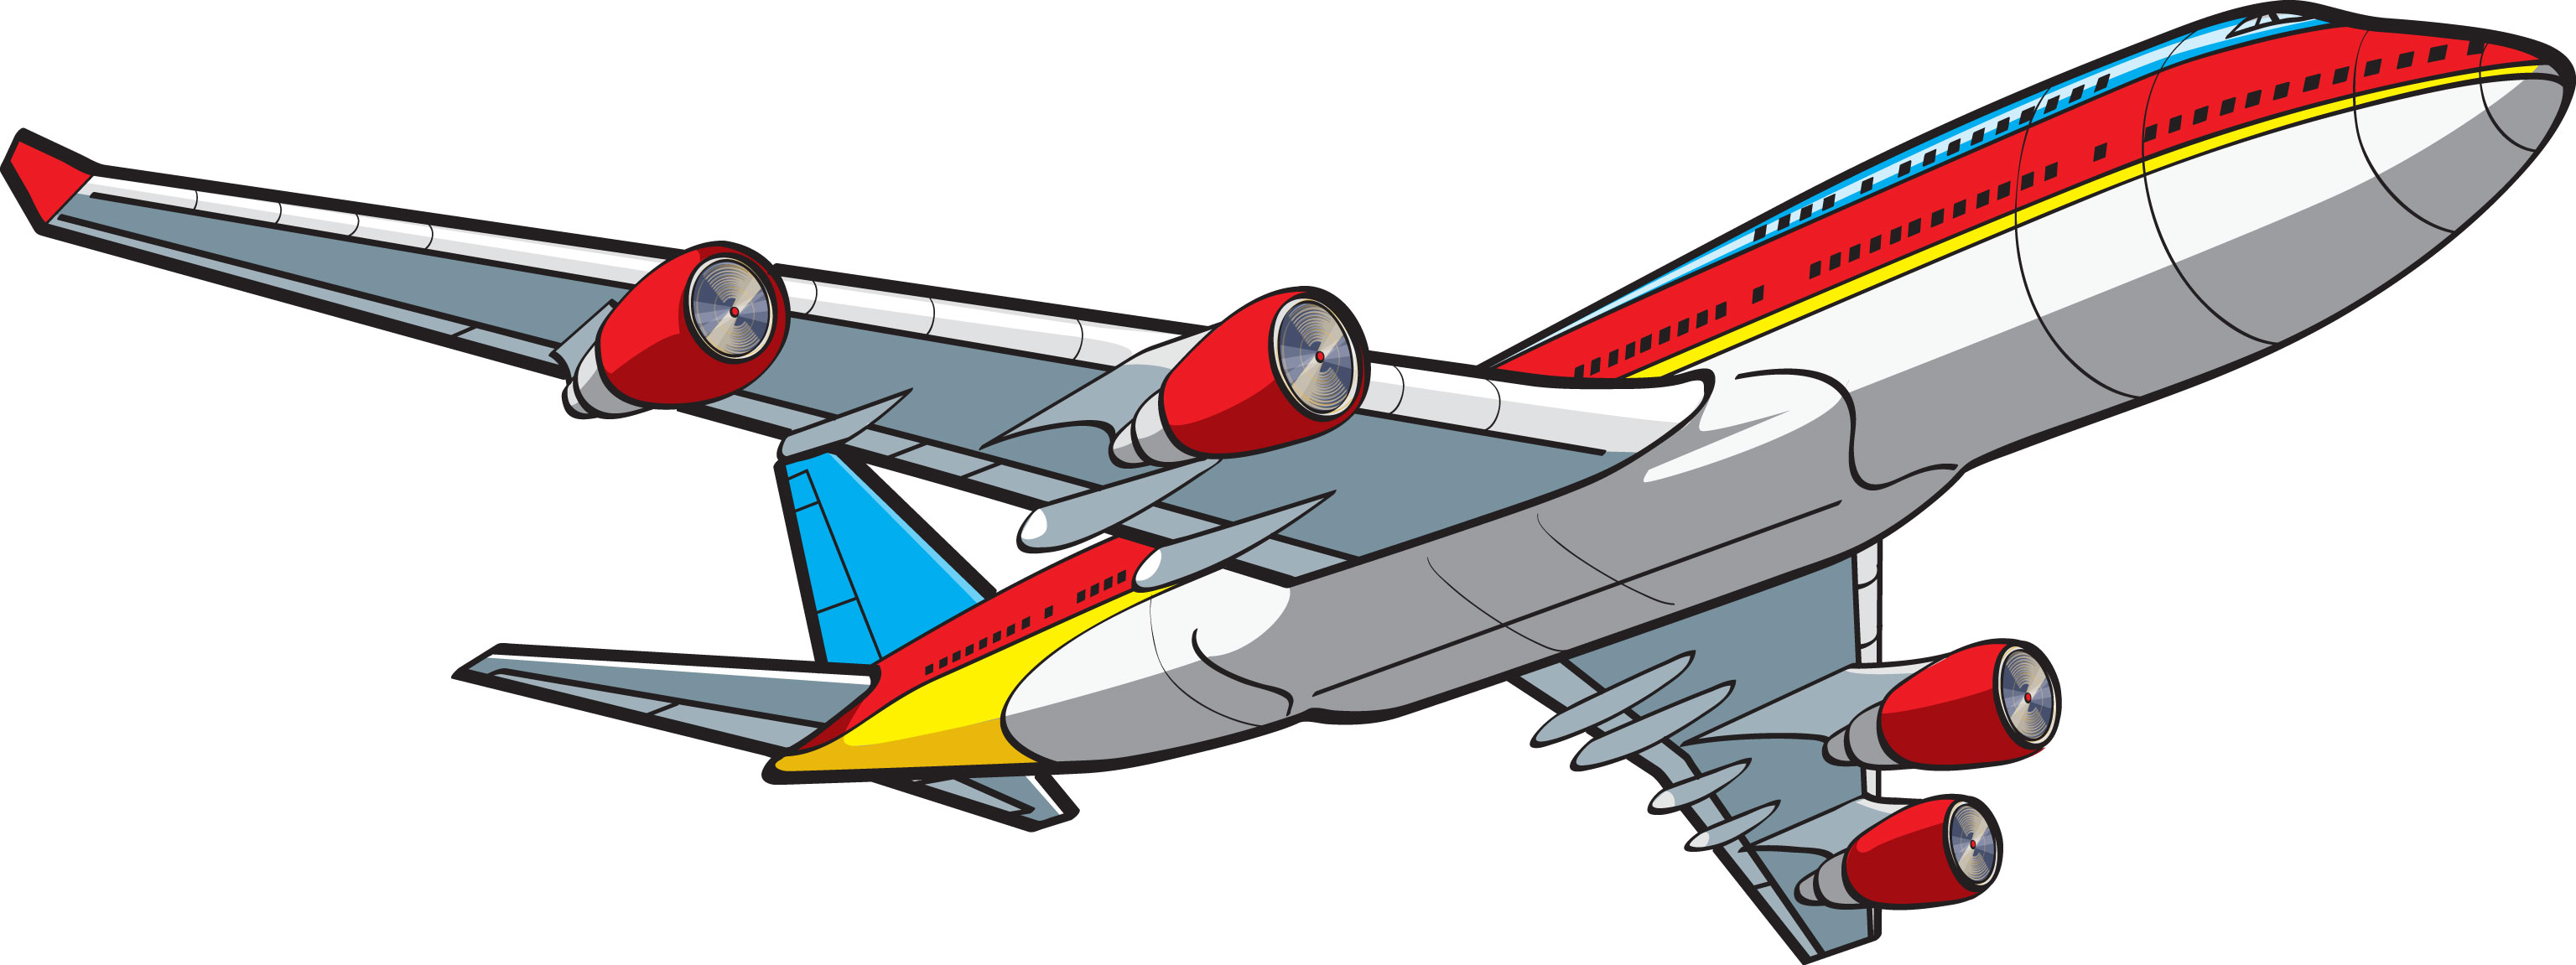 Cute Airplane Images Hd Image Clipart